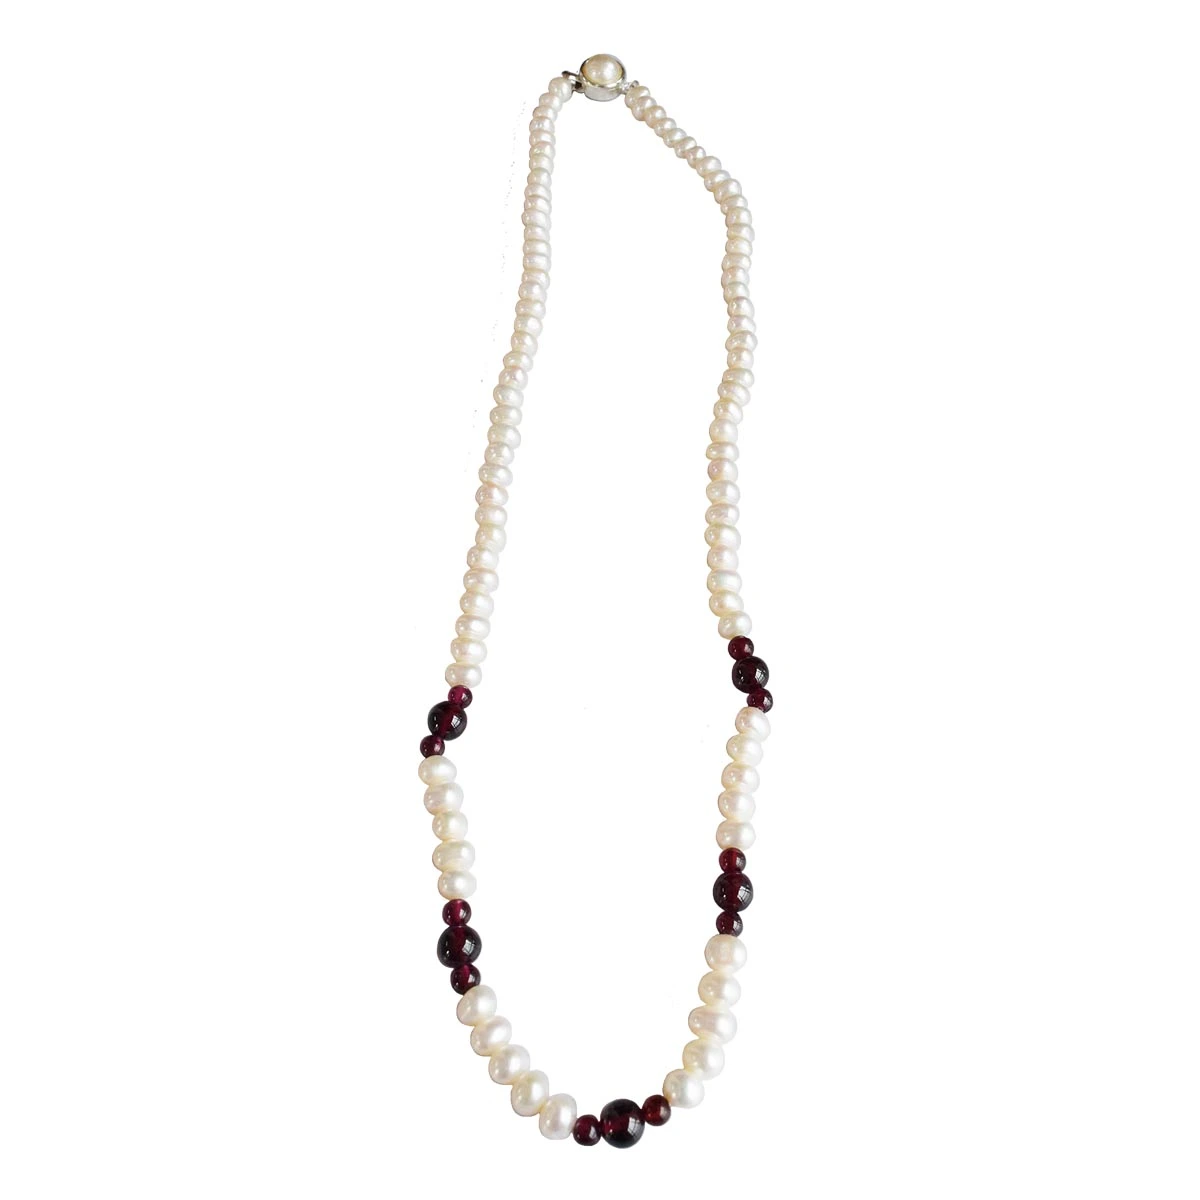 Single Line Real Freshwater Pearl & Red Garnet Beads Necklace for Women (SN1021)